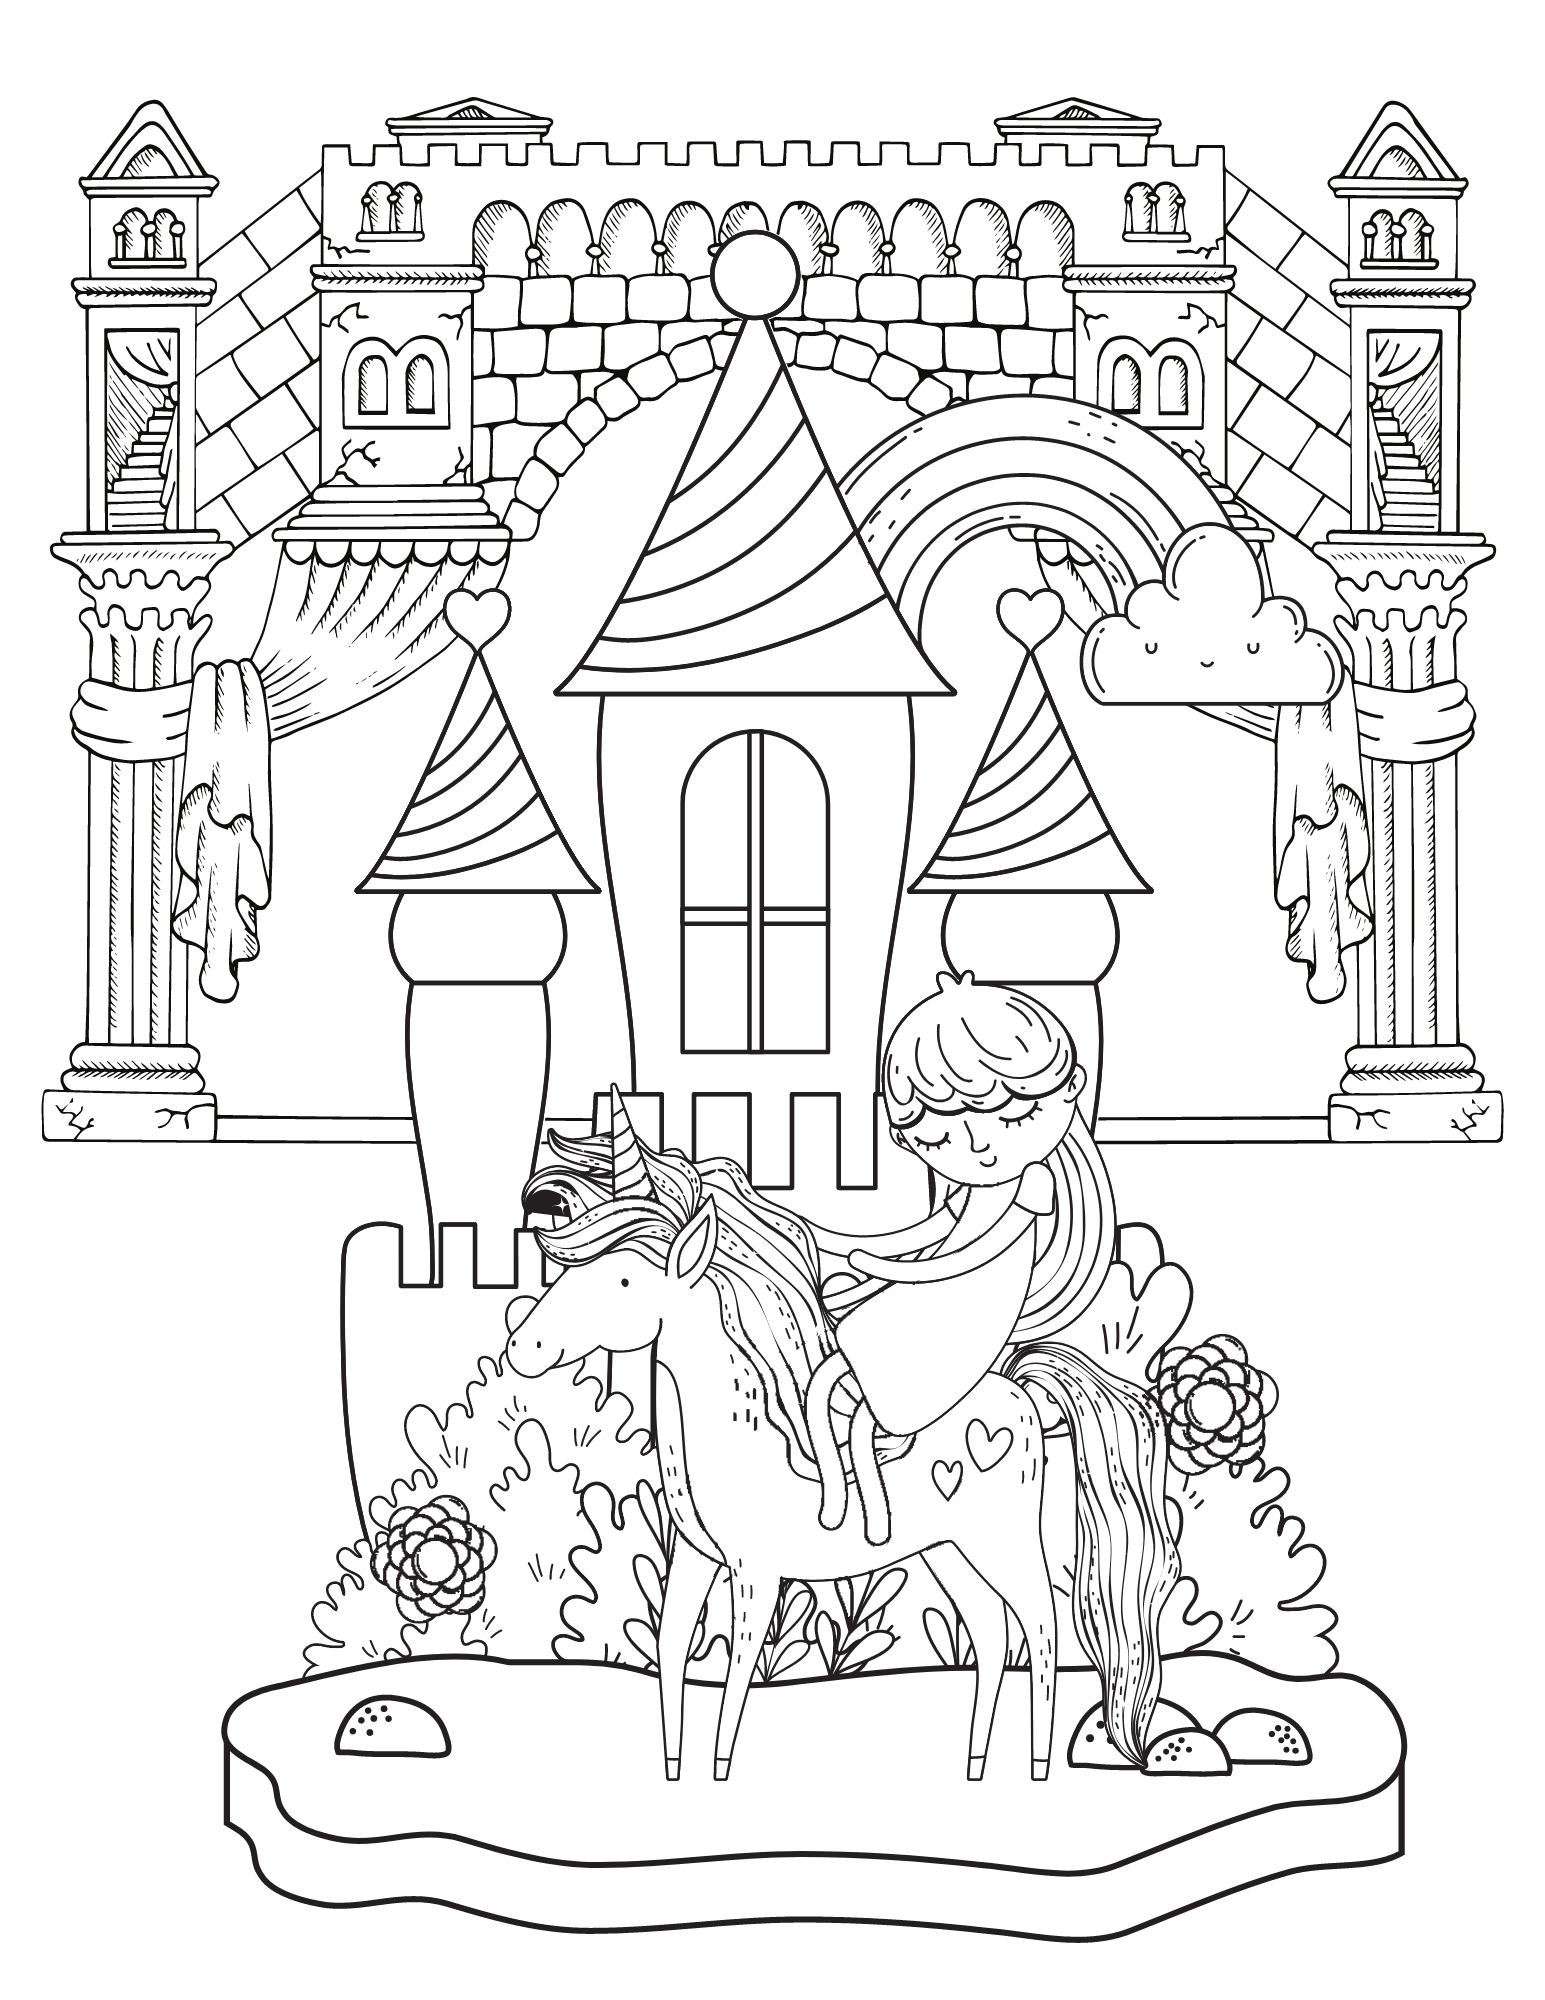 Free castle coloring pages for kids and adults